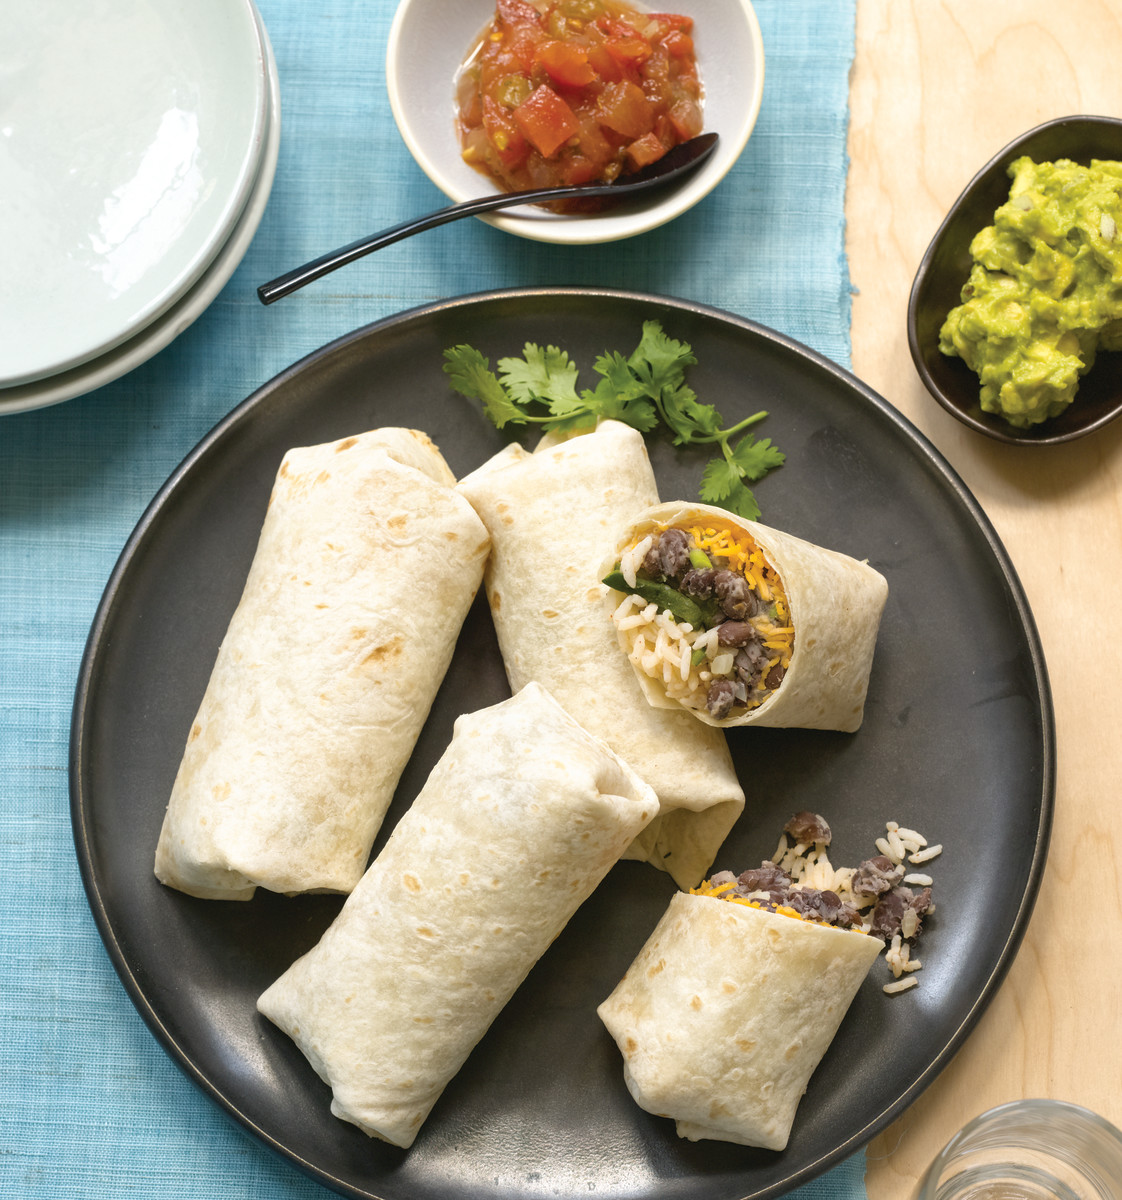 Black Bean Burritos with Ancho Chile Rice